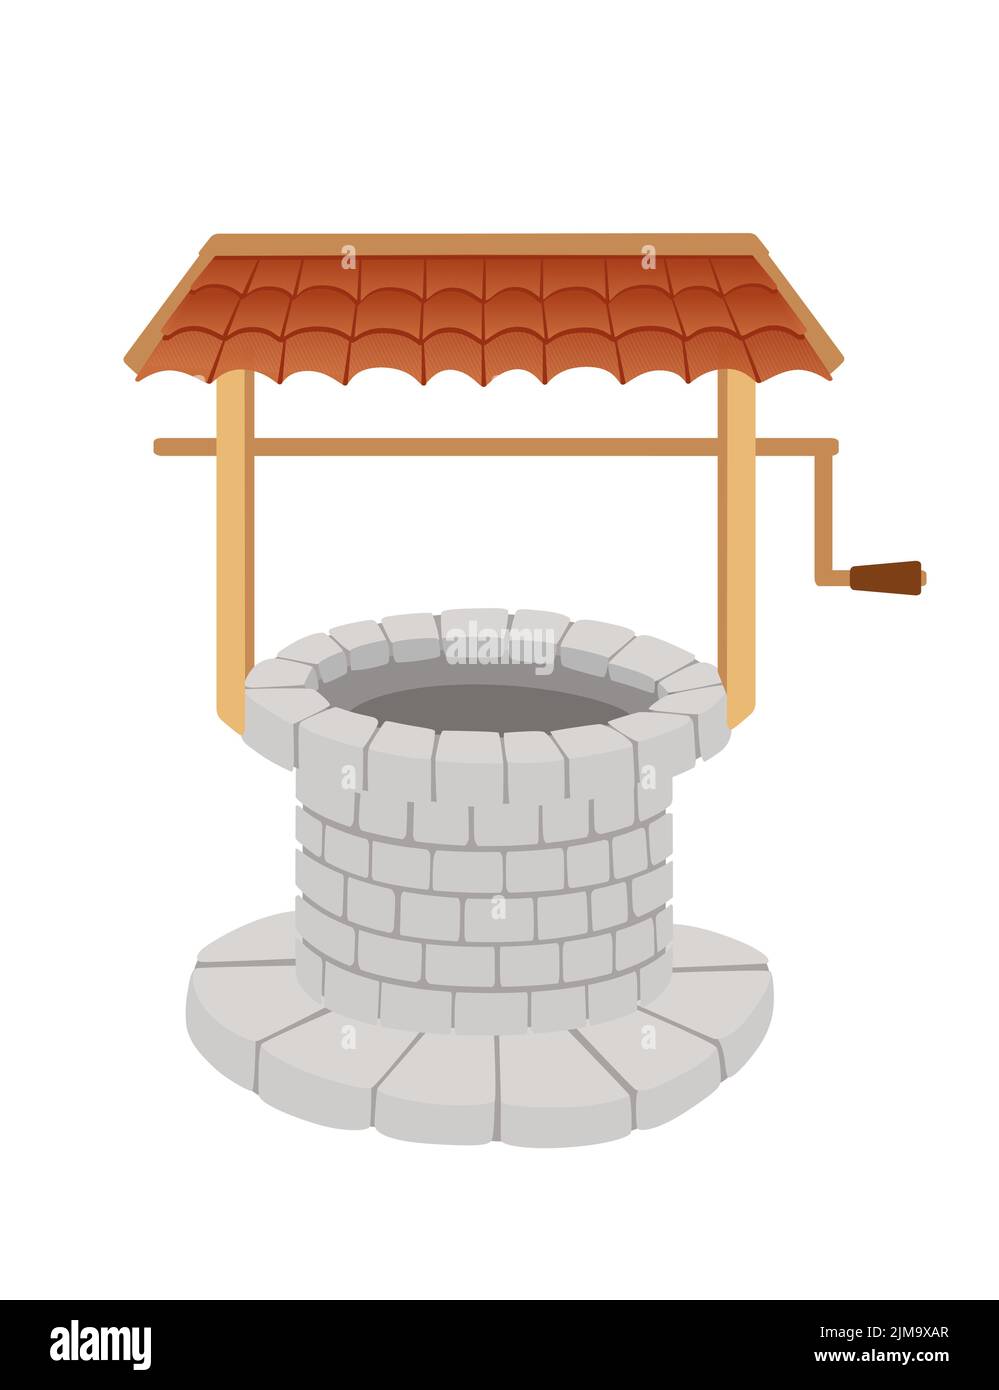 Stone well with rope and roof medieval design vector illustration isolated on white background Stock Vector